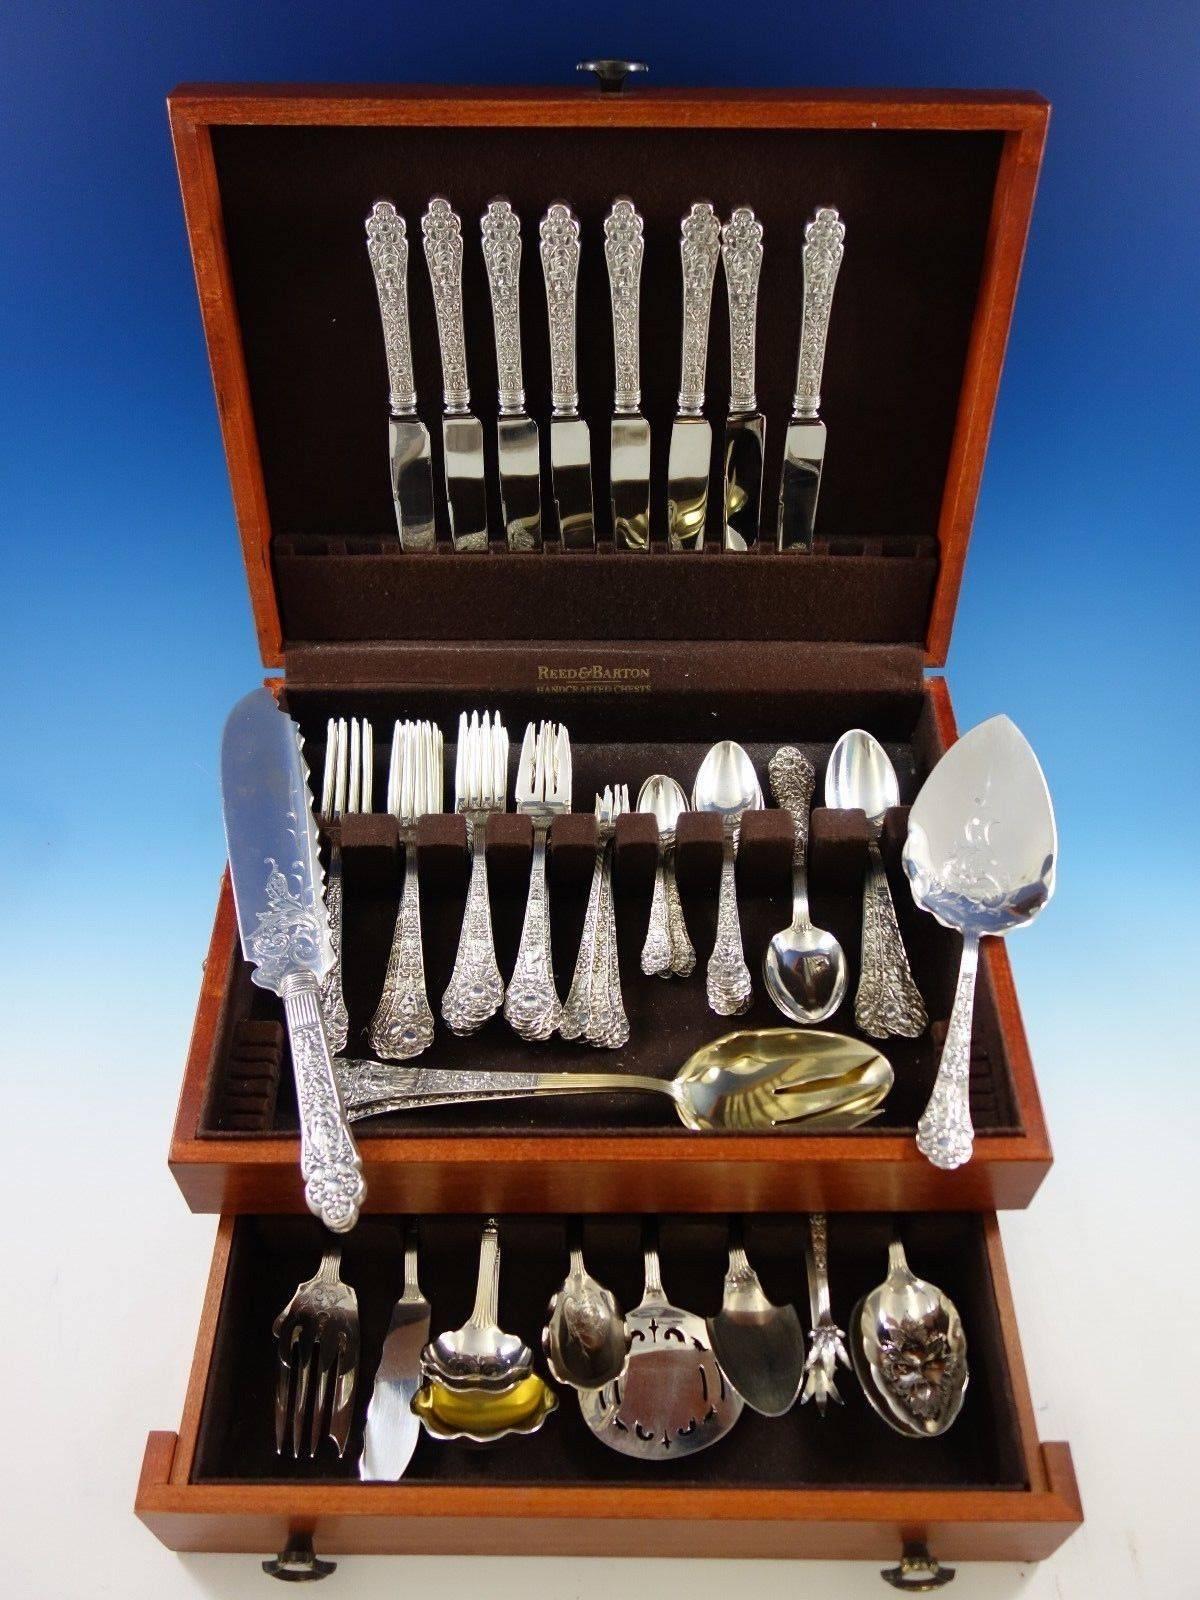 Beautiful Medici Old by Gorham sterling silver Flatware set - 78 pieces. This set includes:

8 Dinner Knives, 9 1/2